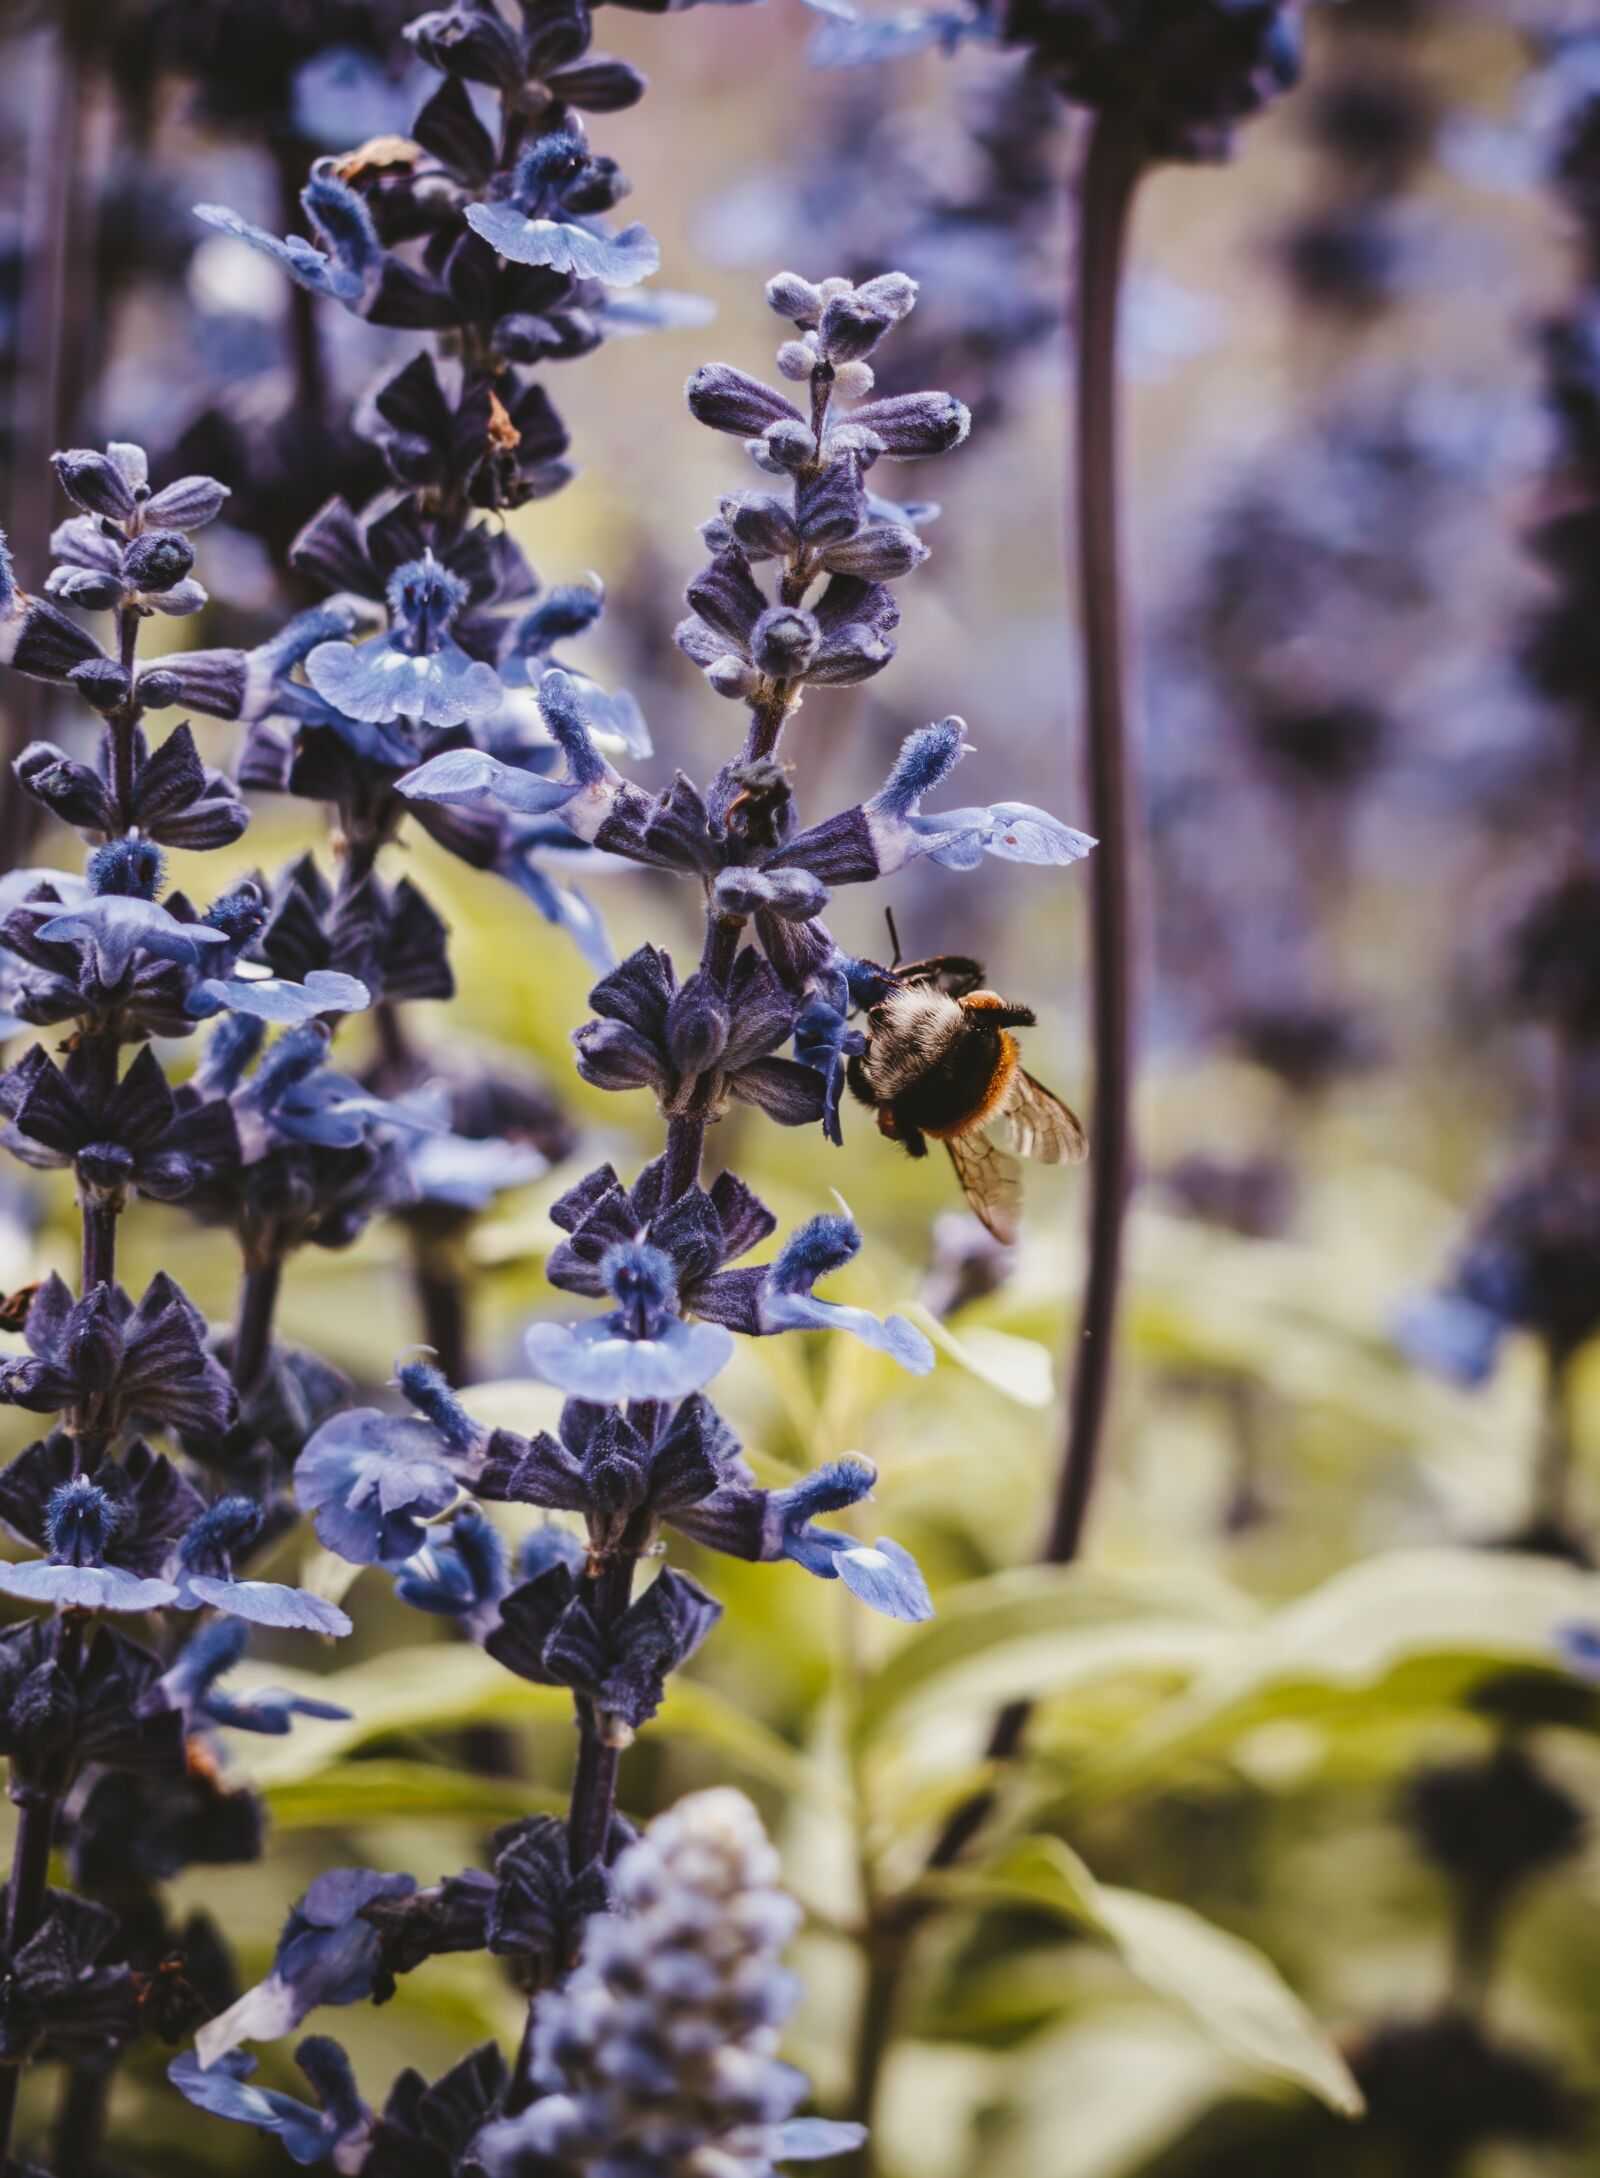 Sony a6300 sample photo. Flowers, bee, nature photography